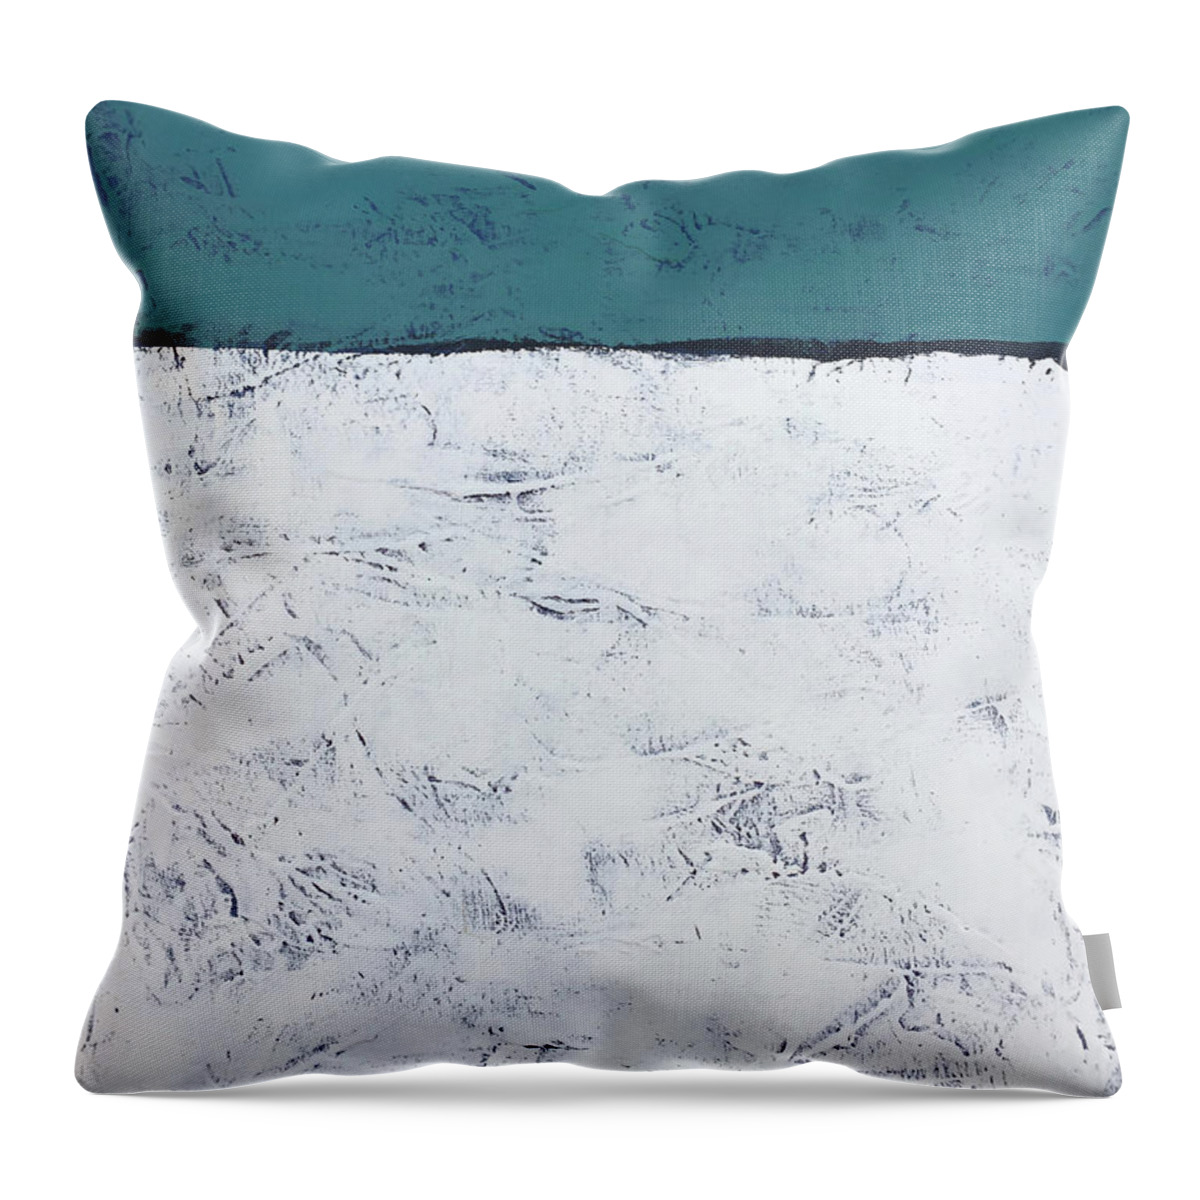 Abstract Throw Pillow featuring the painting Clear And Bright by Carrie MaKenna